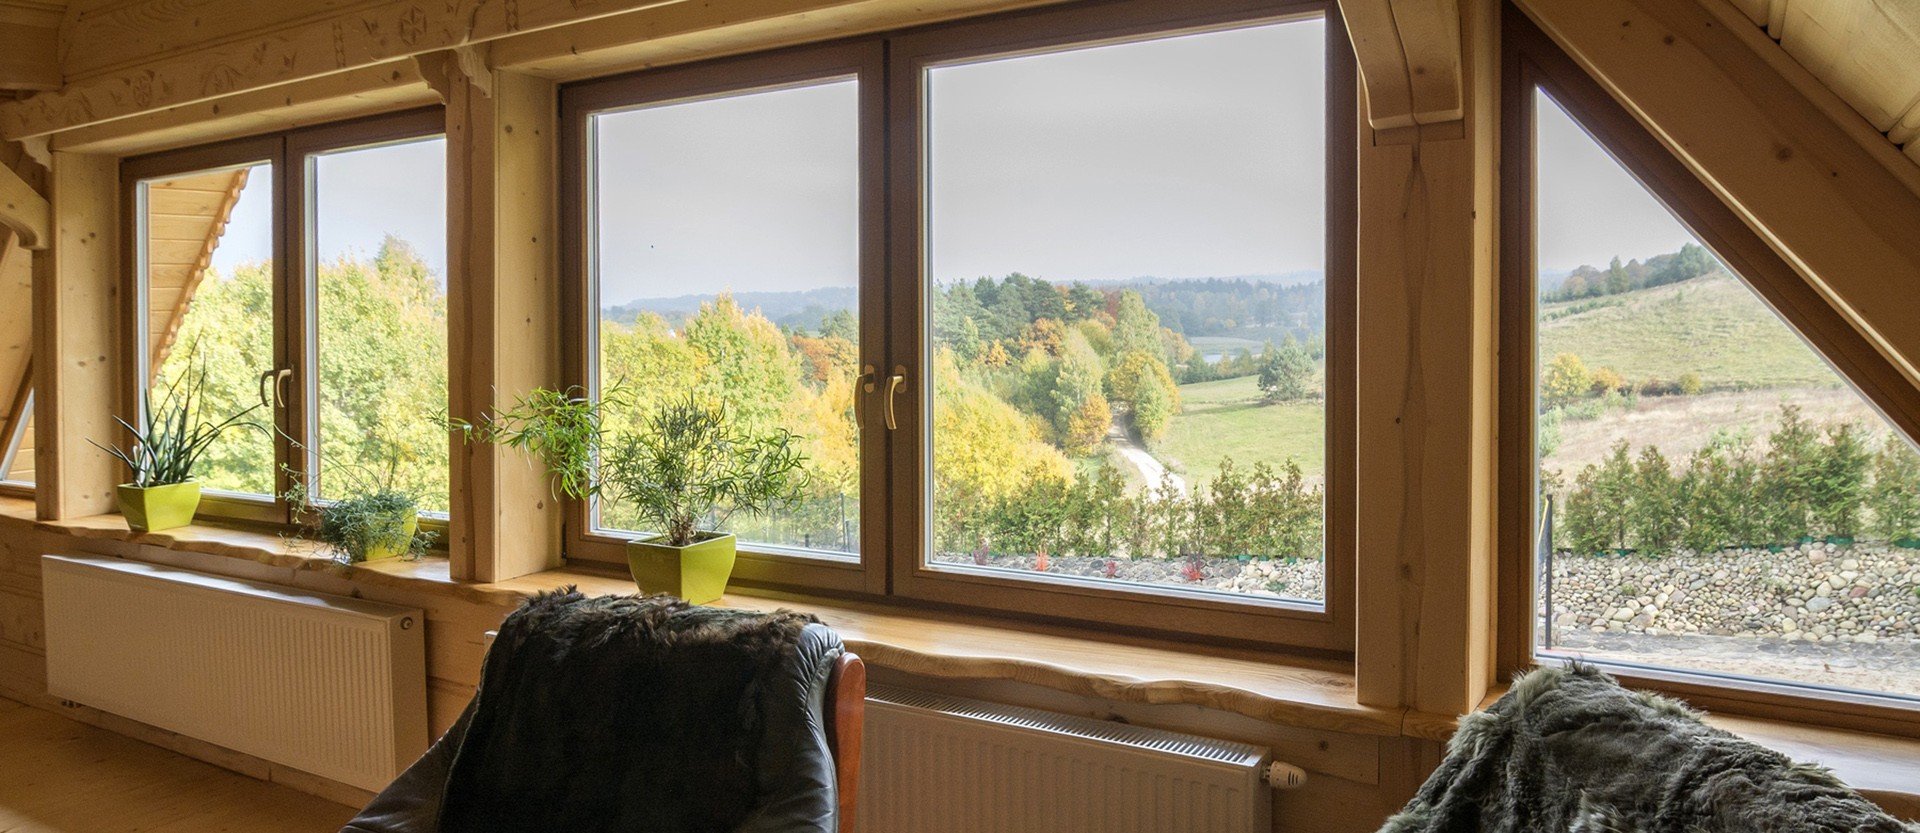 Autumn is coming, it’s the highest time for regulation and maintenance of windows!